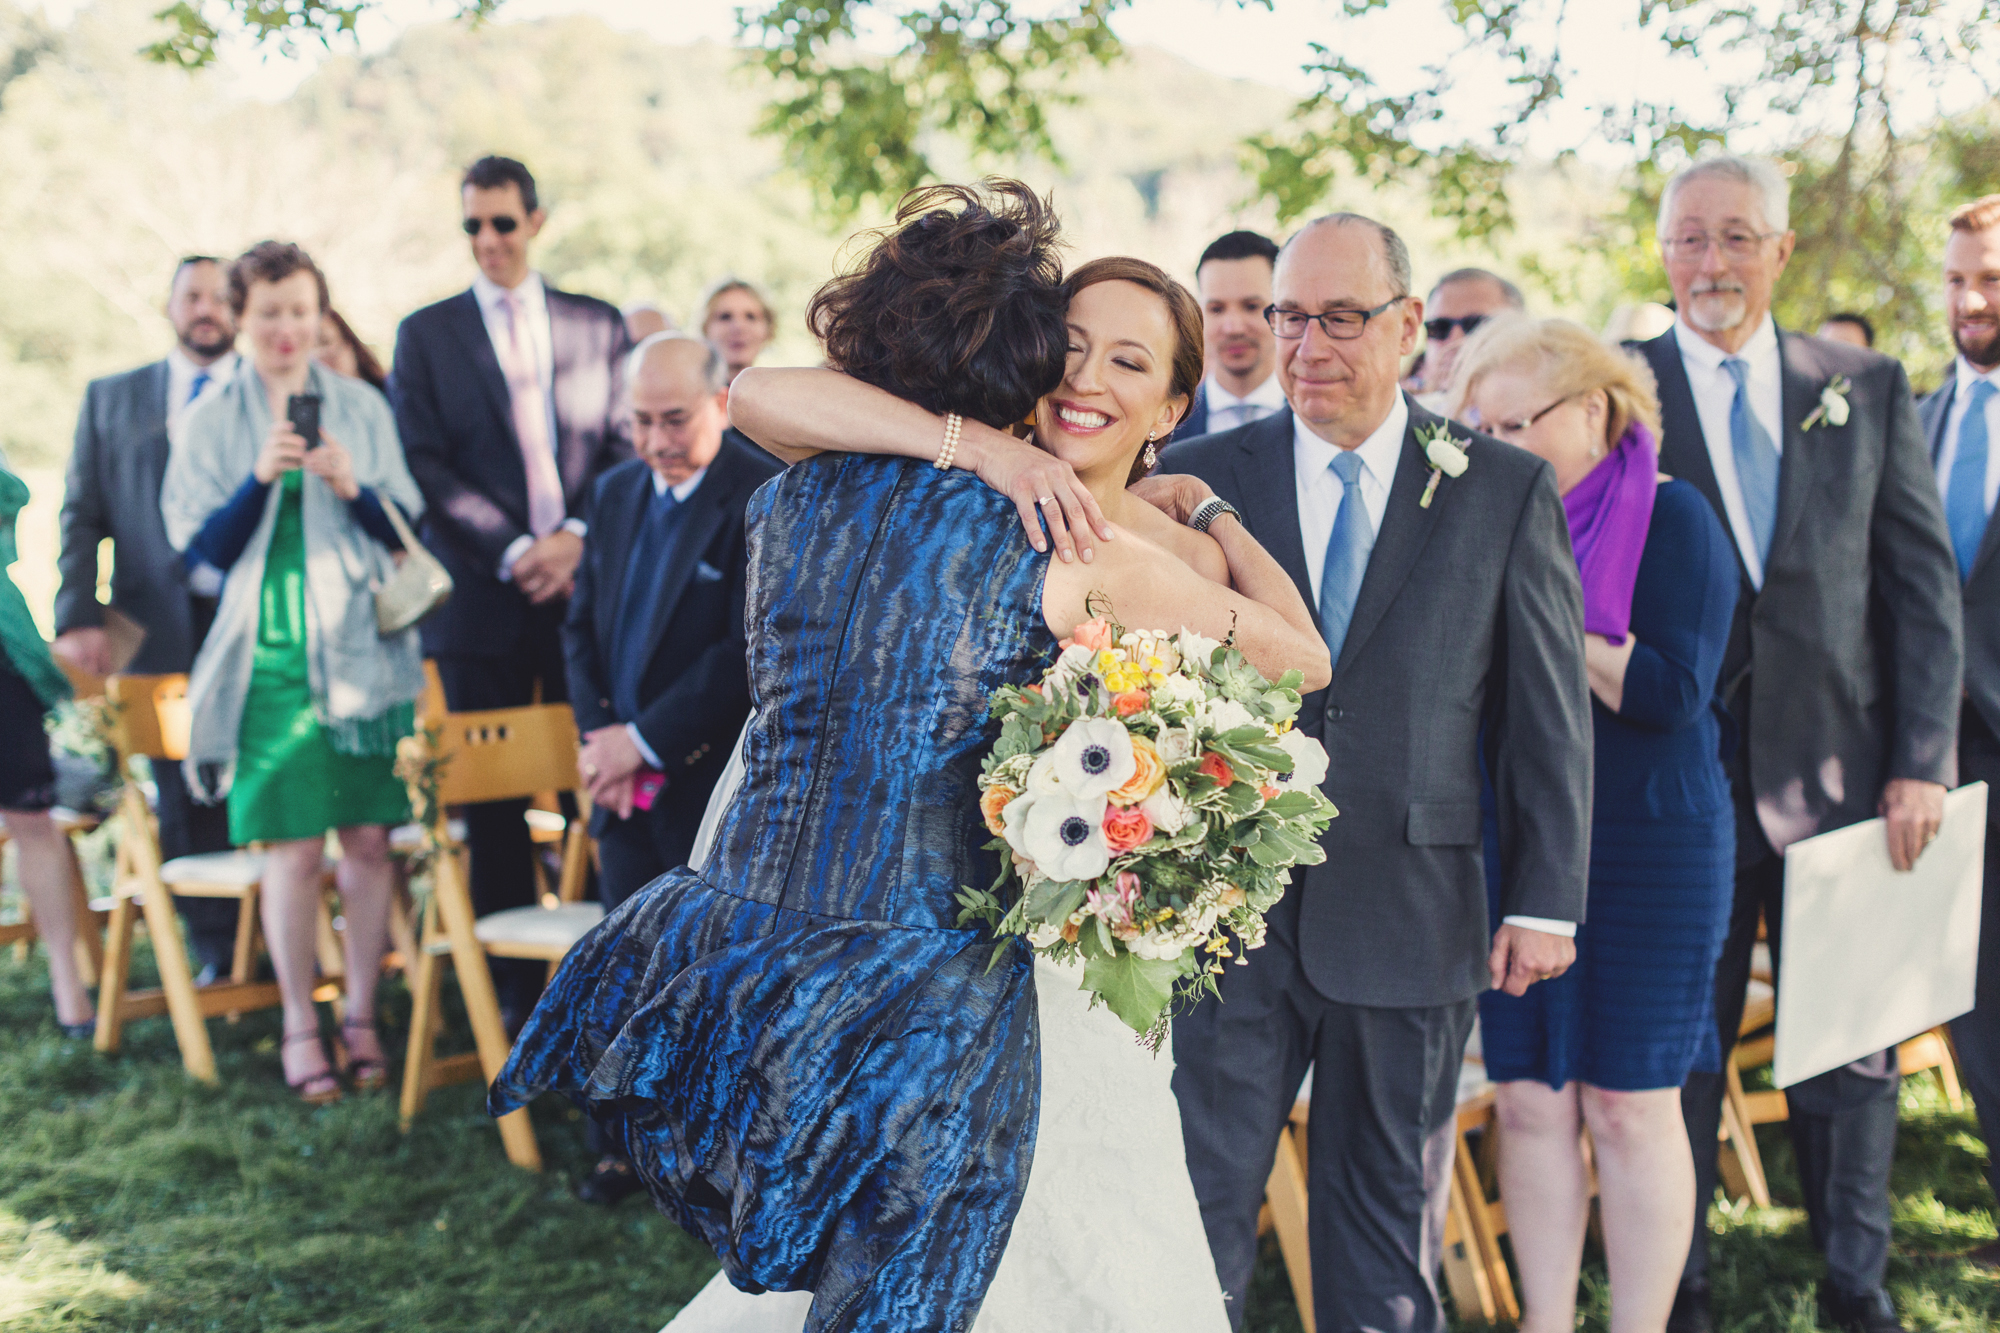 Triple S Ranch Wedding in Napa Valley @Anne-Claire Brun 0505